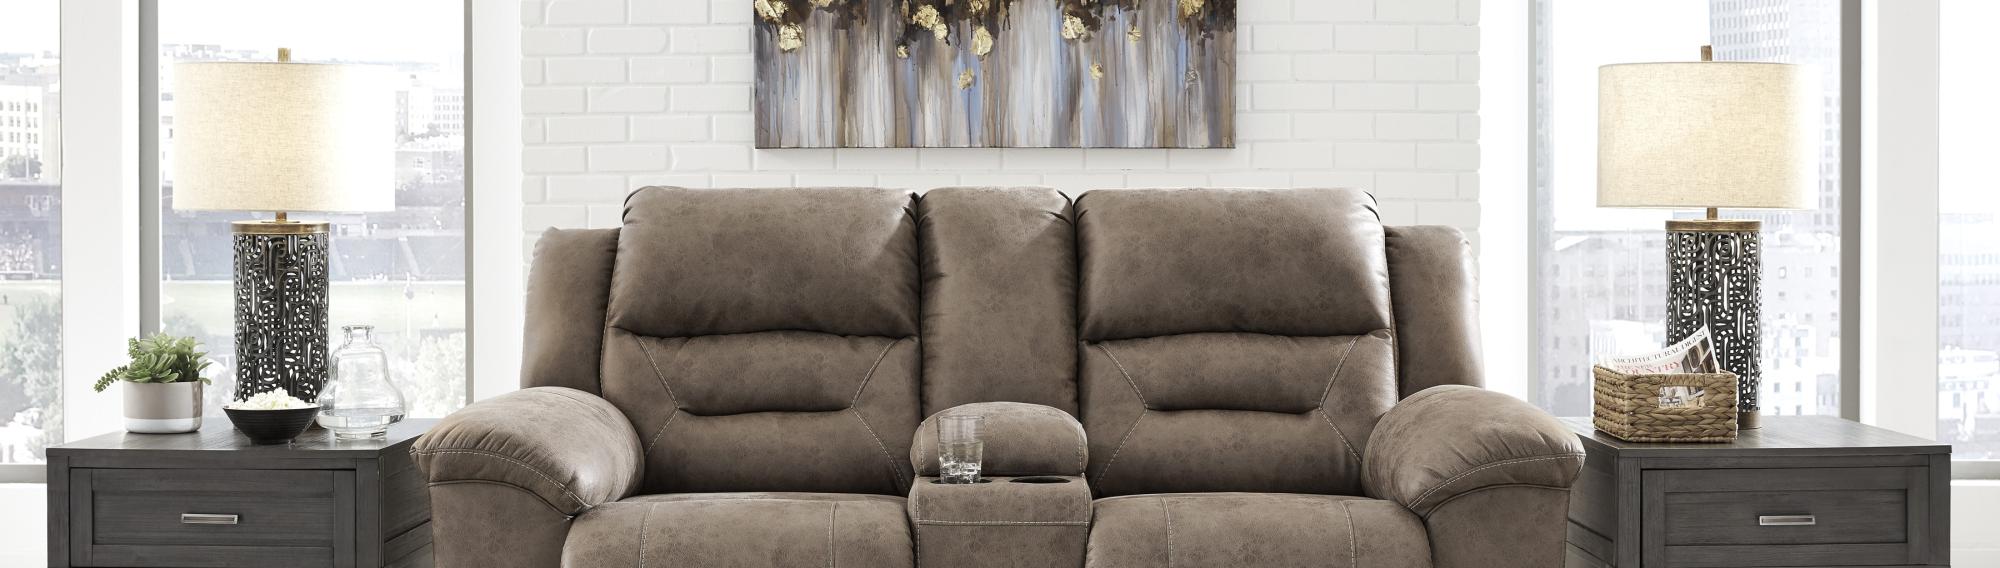 Image of a living room with an affordable brown couch